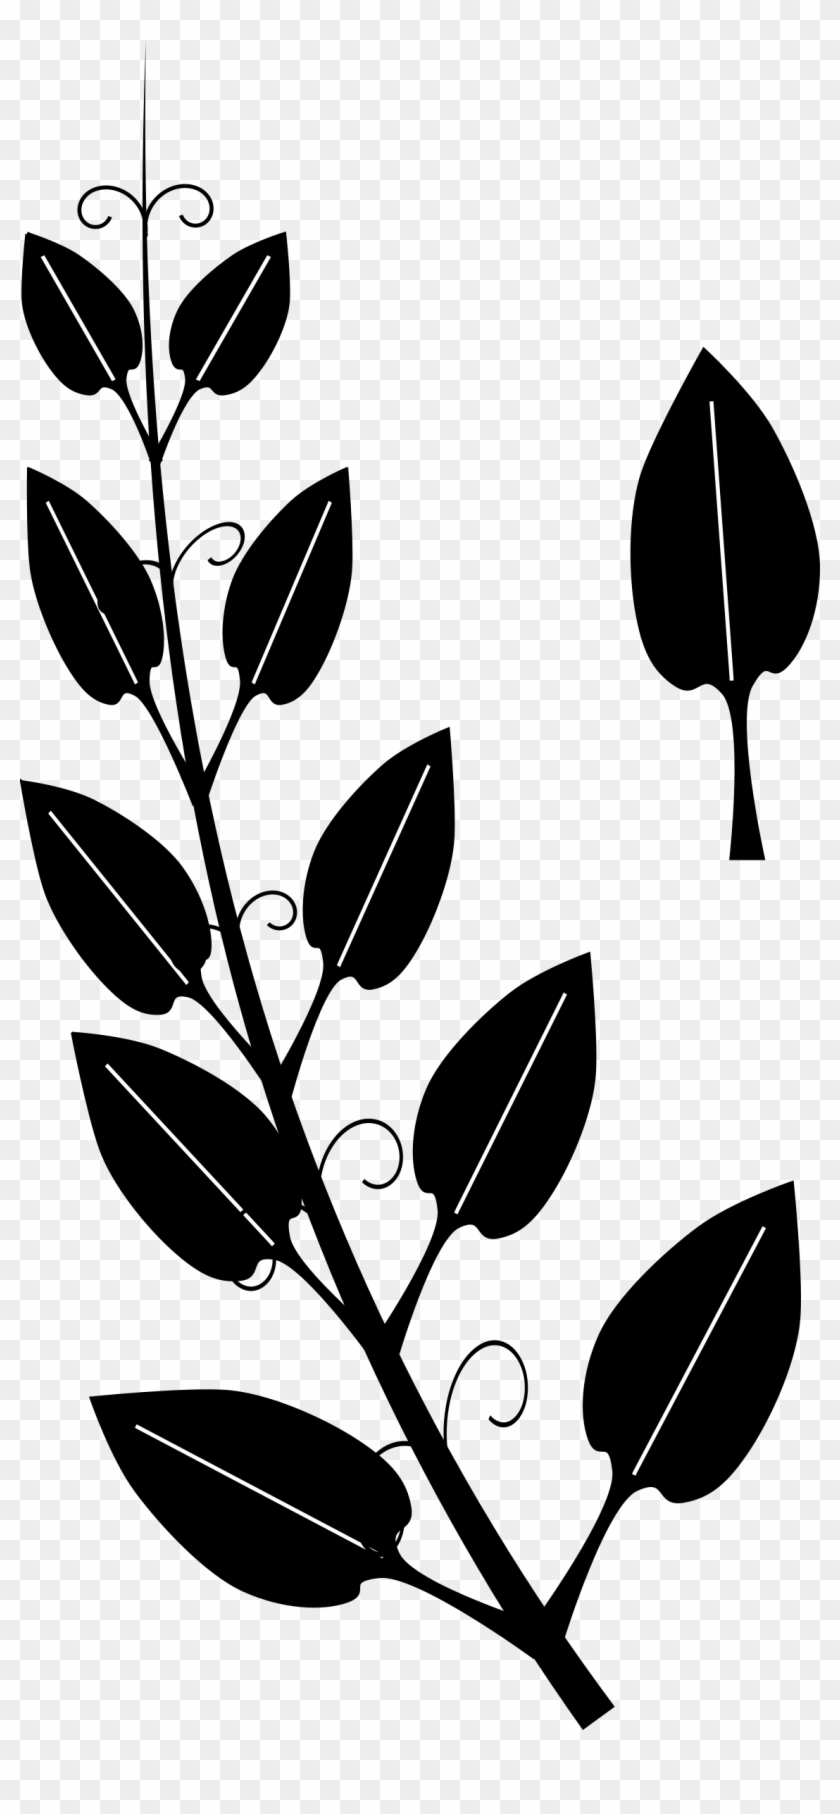 This Free Icons Png Design Of Stylized Vine Clipart #587028